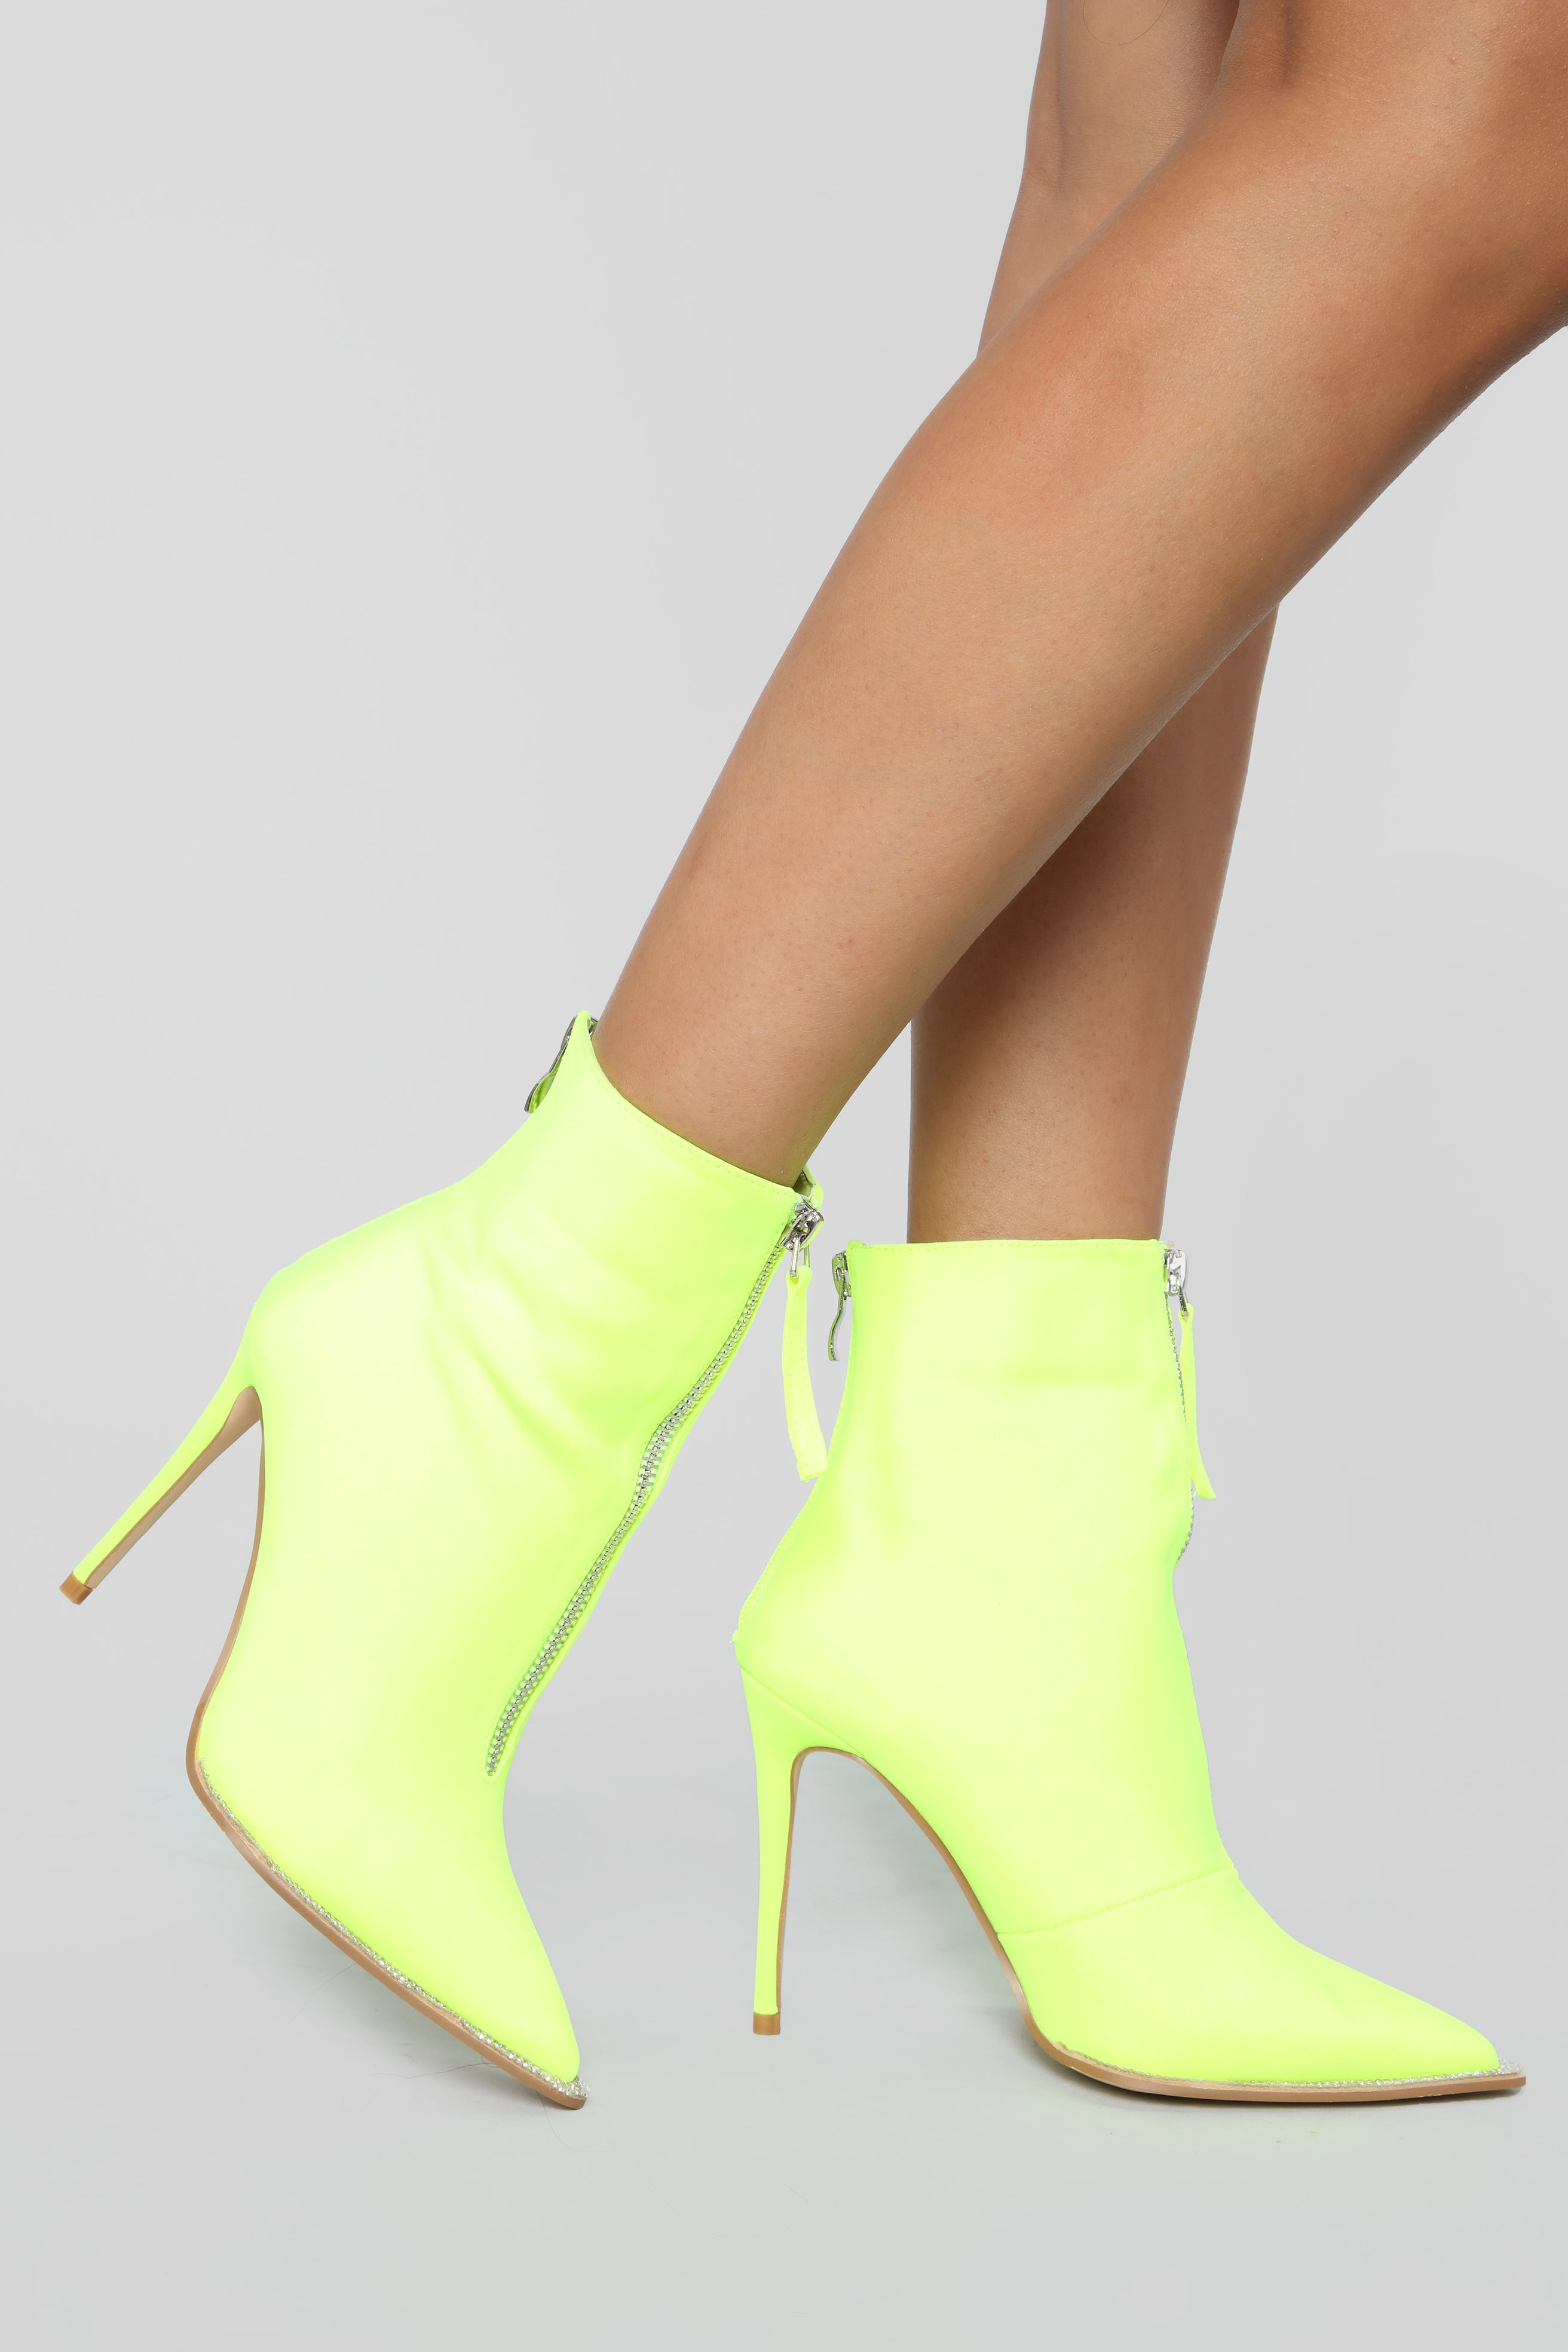 lime green heel boots